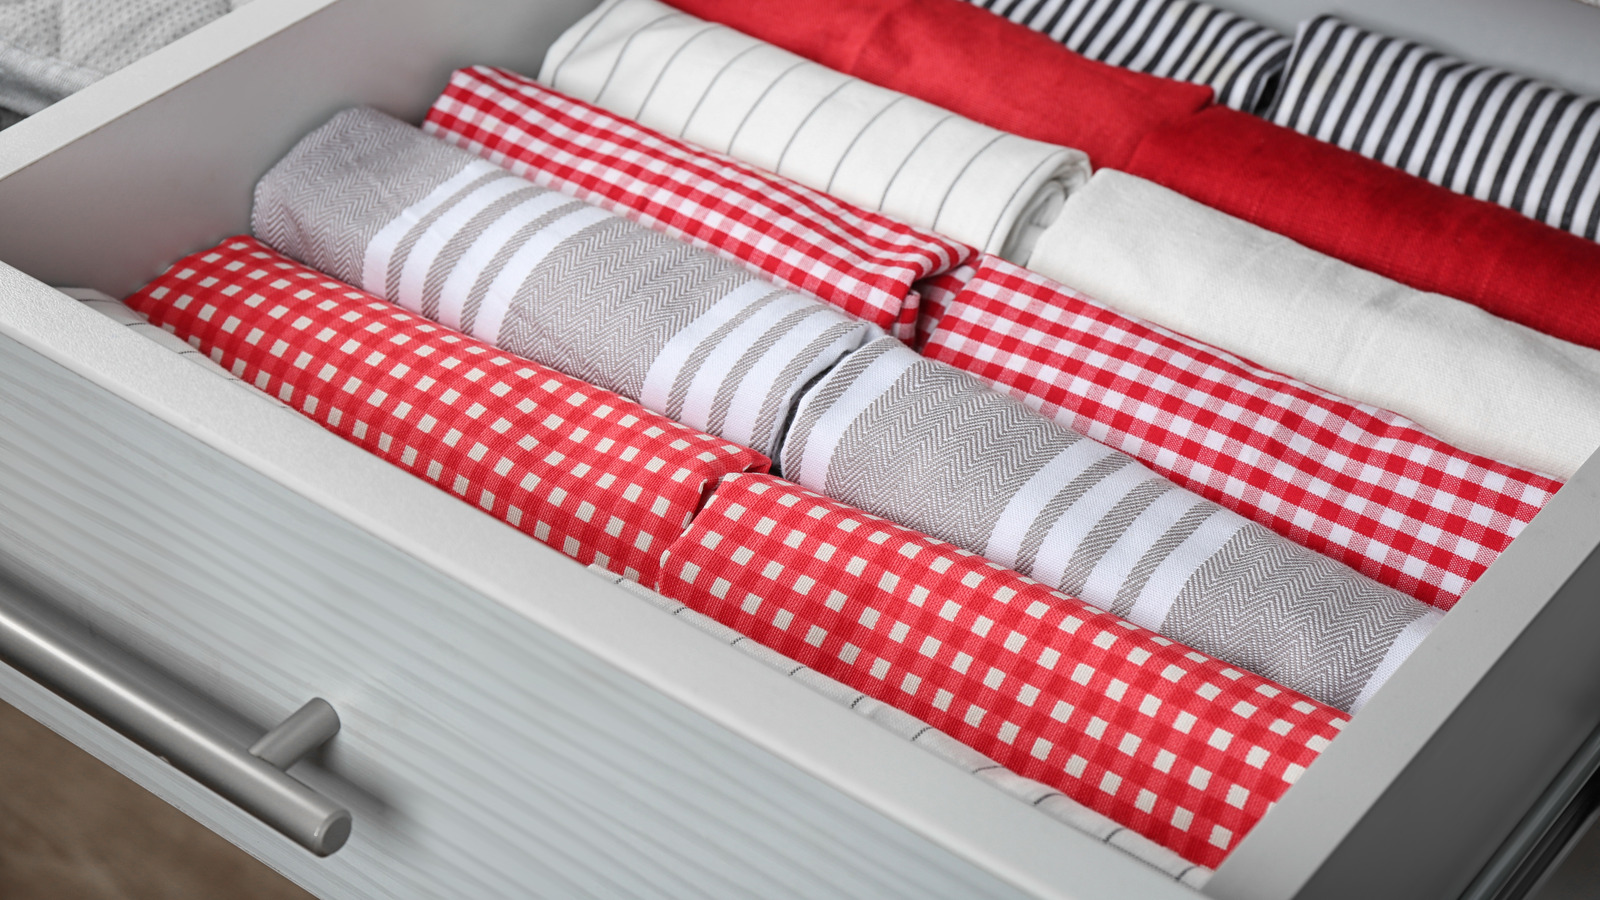 Use Marie Kondo's Folding Method To Keep Your Towels In Check